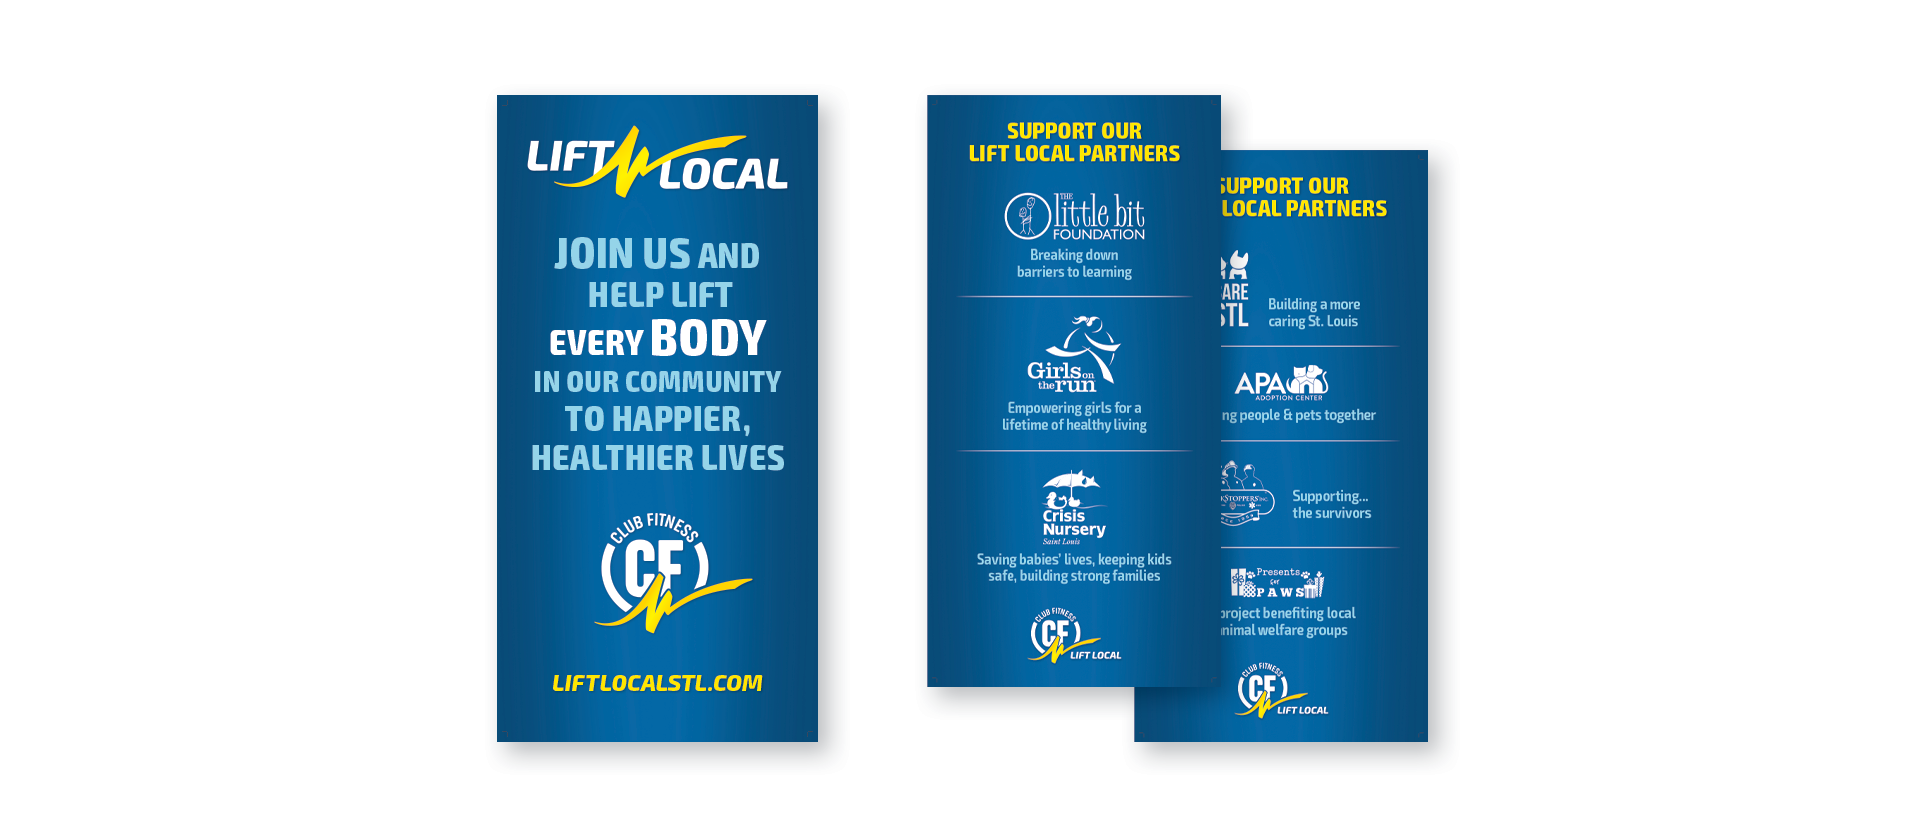 Club Fitness Lift Local banners